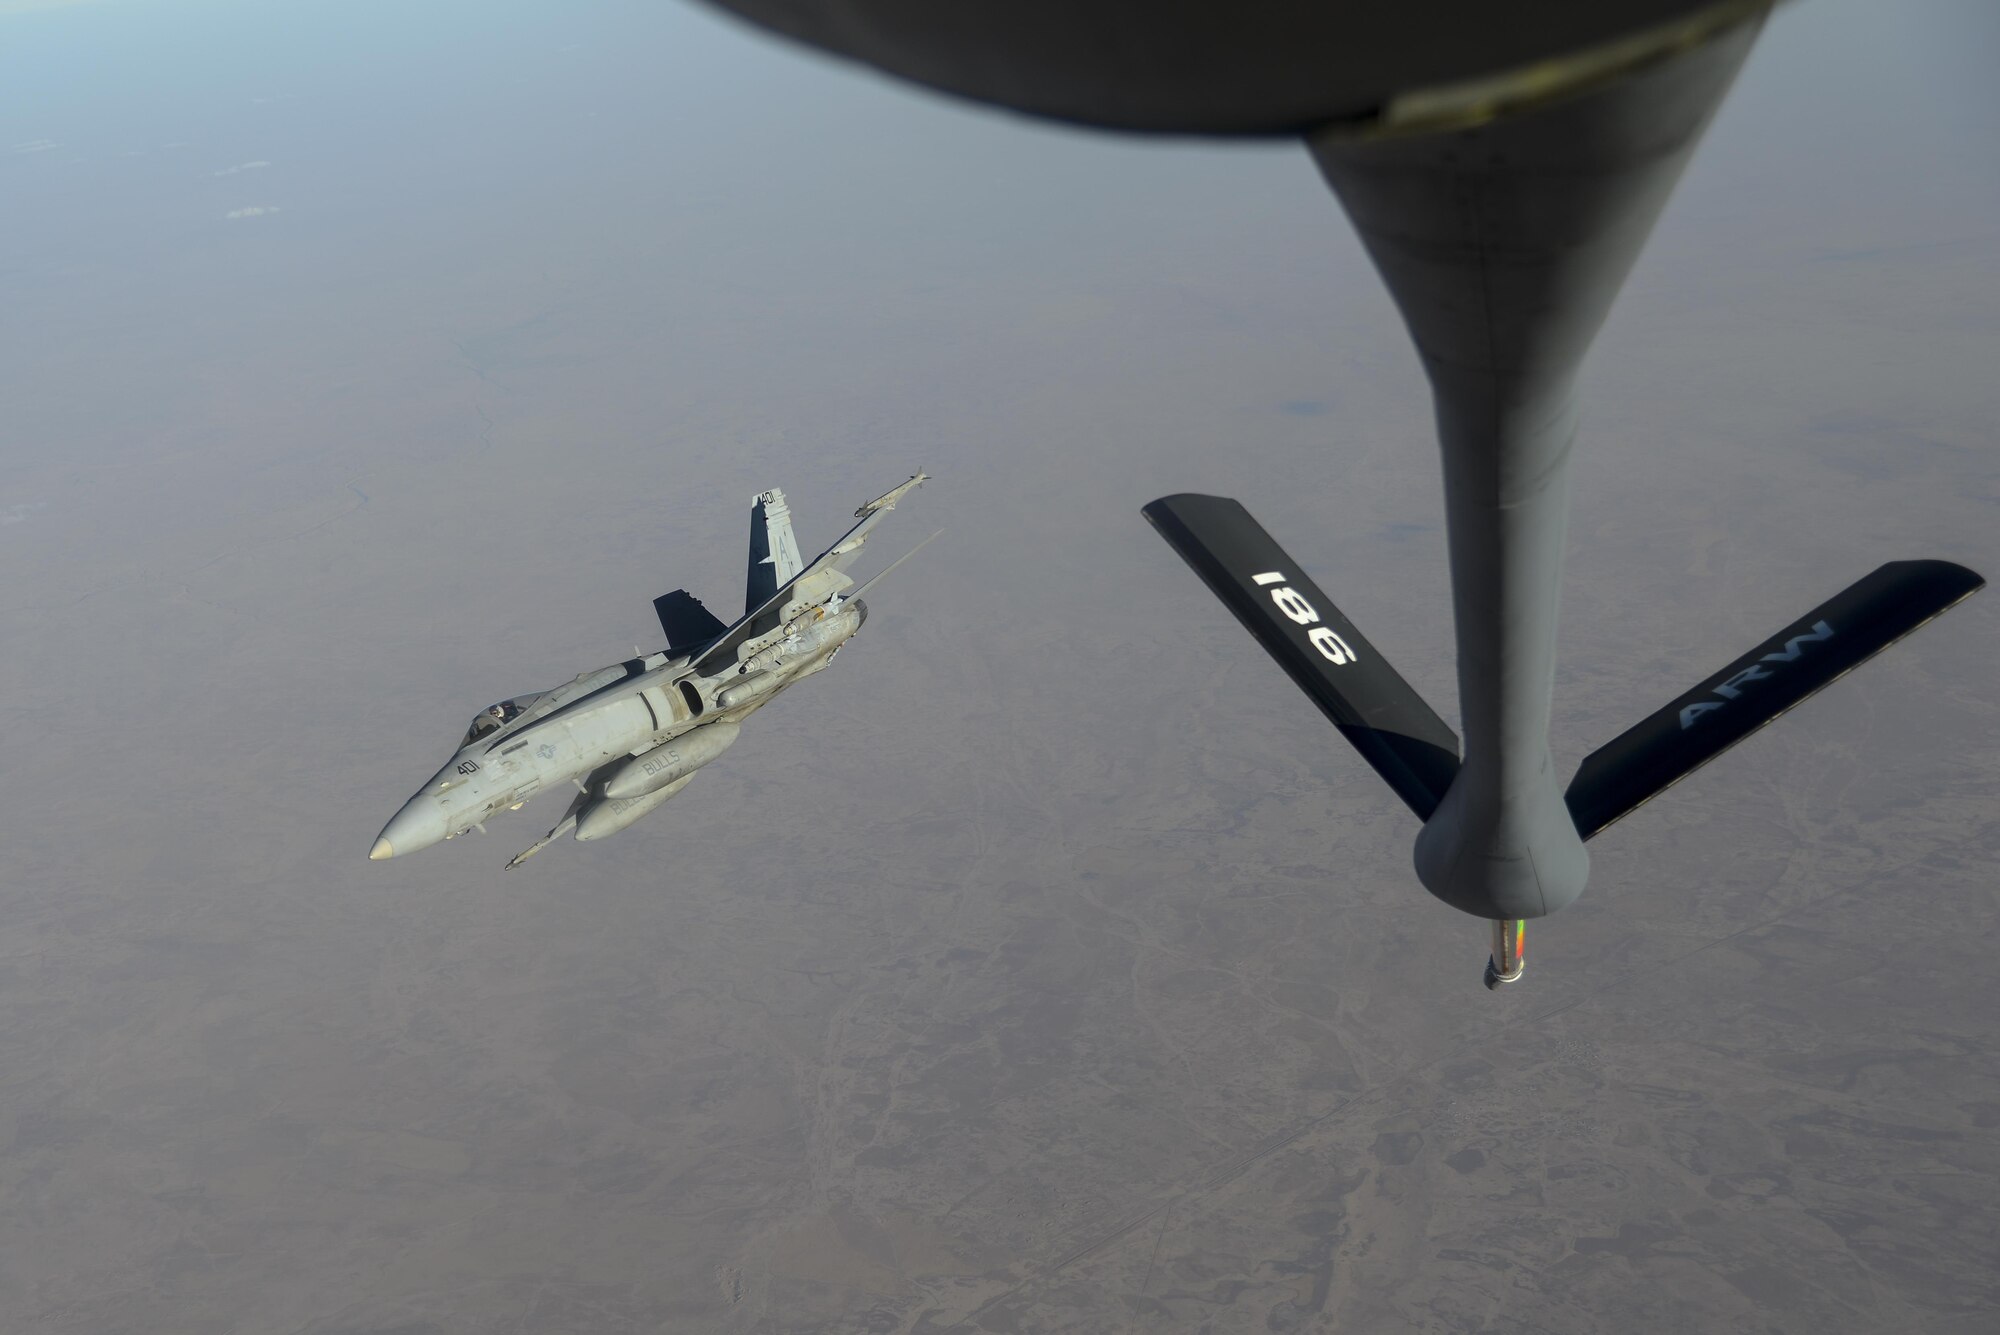 A U.S. Navy F/A-18C from the VFA-37 Ragin' Bulls breaks right after receiving fuel from a U.S. Air Force KC-135 Stratotanker over Southwest Asia May 21, 2017.  Assigned to the 340th Expeditionary Air Refueling Squadron, out of Al Udeid Air Base, Qatar, the tanker from the 186th Air Refueling Wing, Mississippi Air National Guard was fitted with a drogue attached to the boom, for specialized receiver equipment on Navy and coalition aircraft. The 340th EARS maintains a 24/7 presence in the AOR, extending the missions of aircraft supporting Operation Inherent Resolve and the fight against ISIS. (U.S. Air National Guard photo by Master Sgt. Andrew J. Moseley/Released)